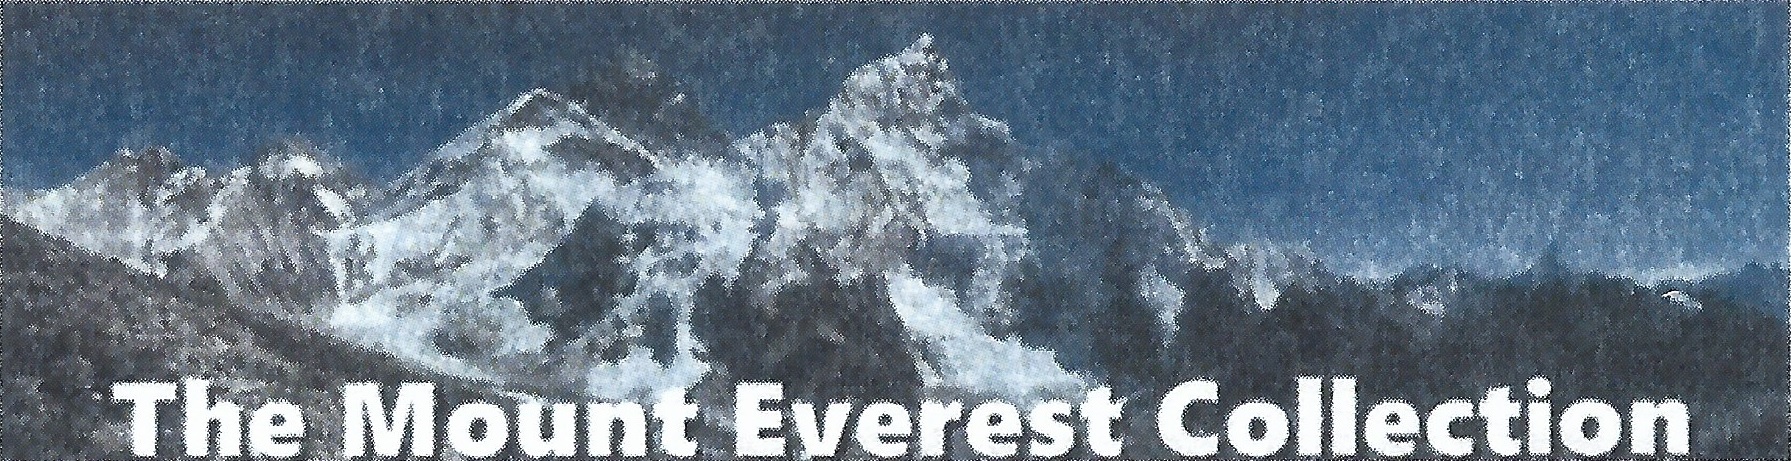 The_Mount_Everest_Cllection